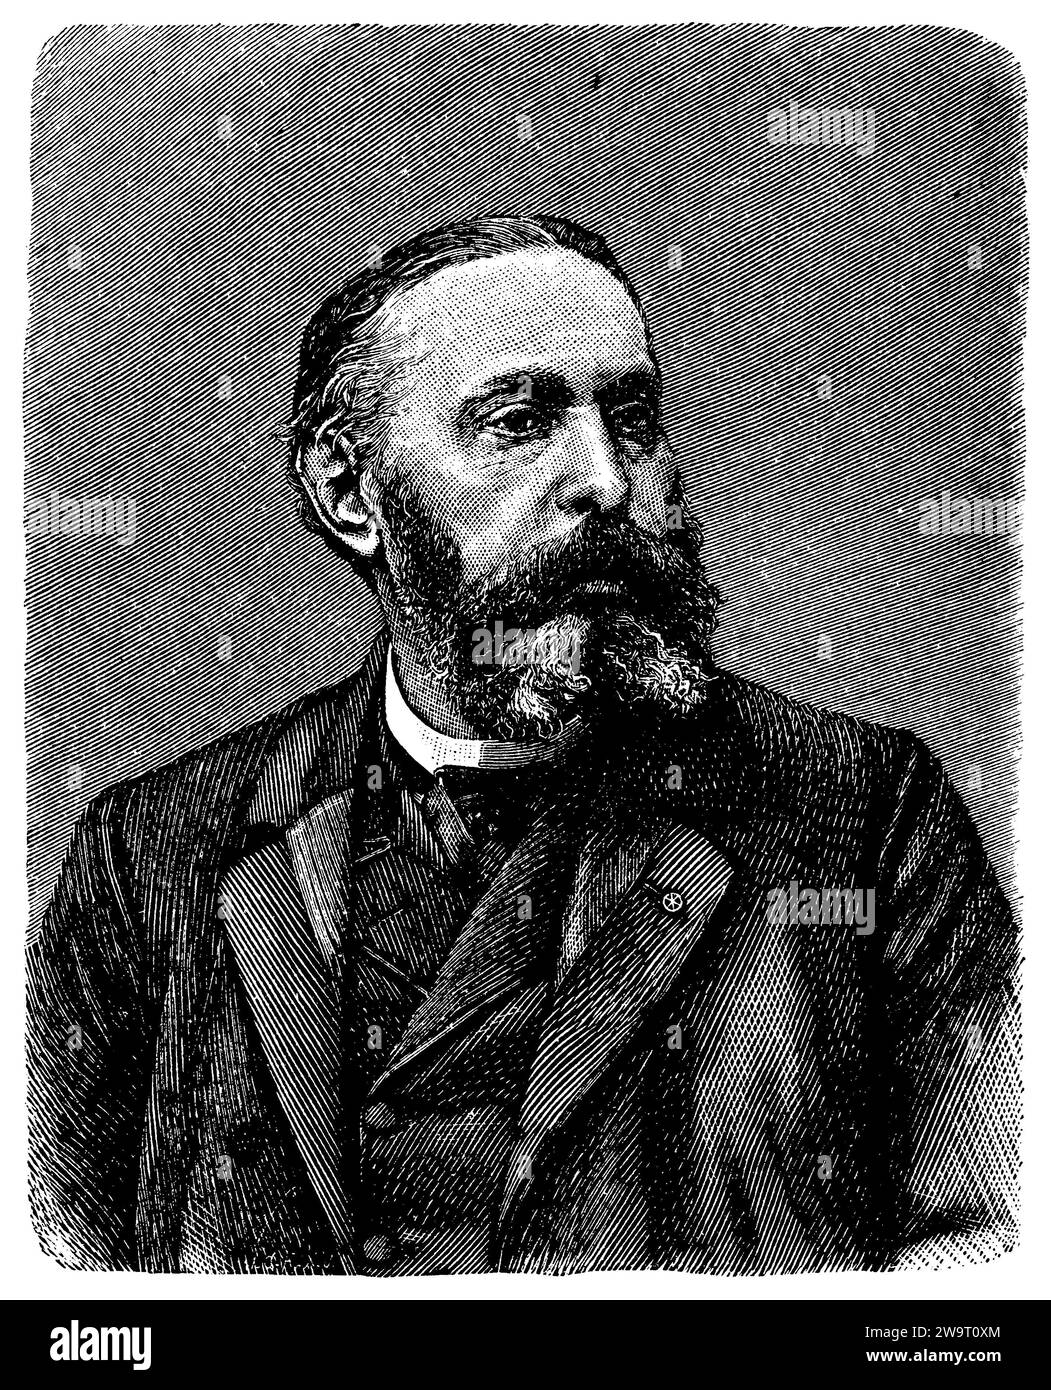 Sully Prudhomme (1839-1907), French writer, after a photograph by Pierre Petit in Paris, ,  (literary history book, 1900), Sully Prudhomme (1839-1907), französischer Schriftsteller, nach einer Fotografie von Pierre Petit in Paris, Sully Prudhomme (1839-1907), écrivain français, d'après une photographie de Pierre Petit à Paris Stock Photo